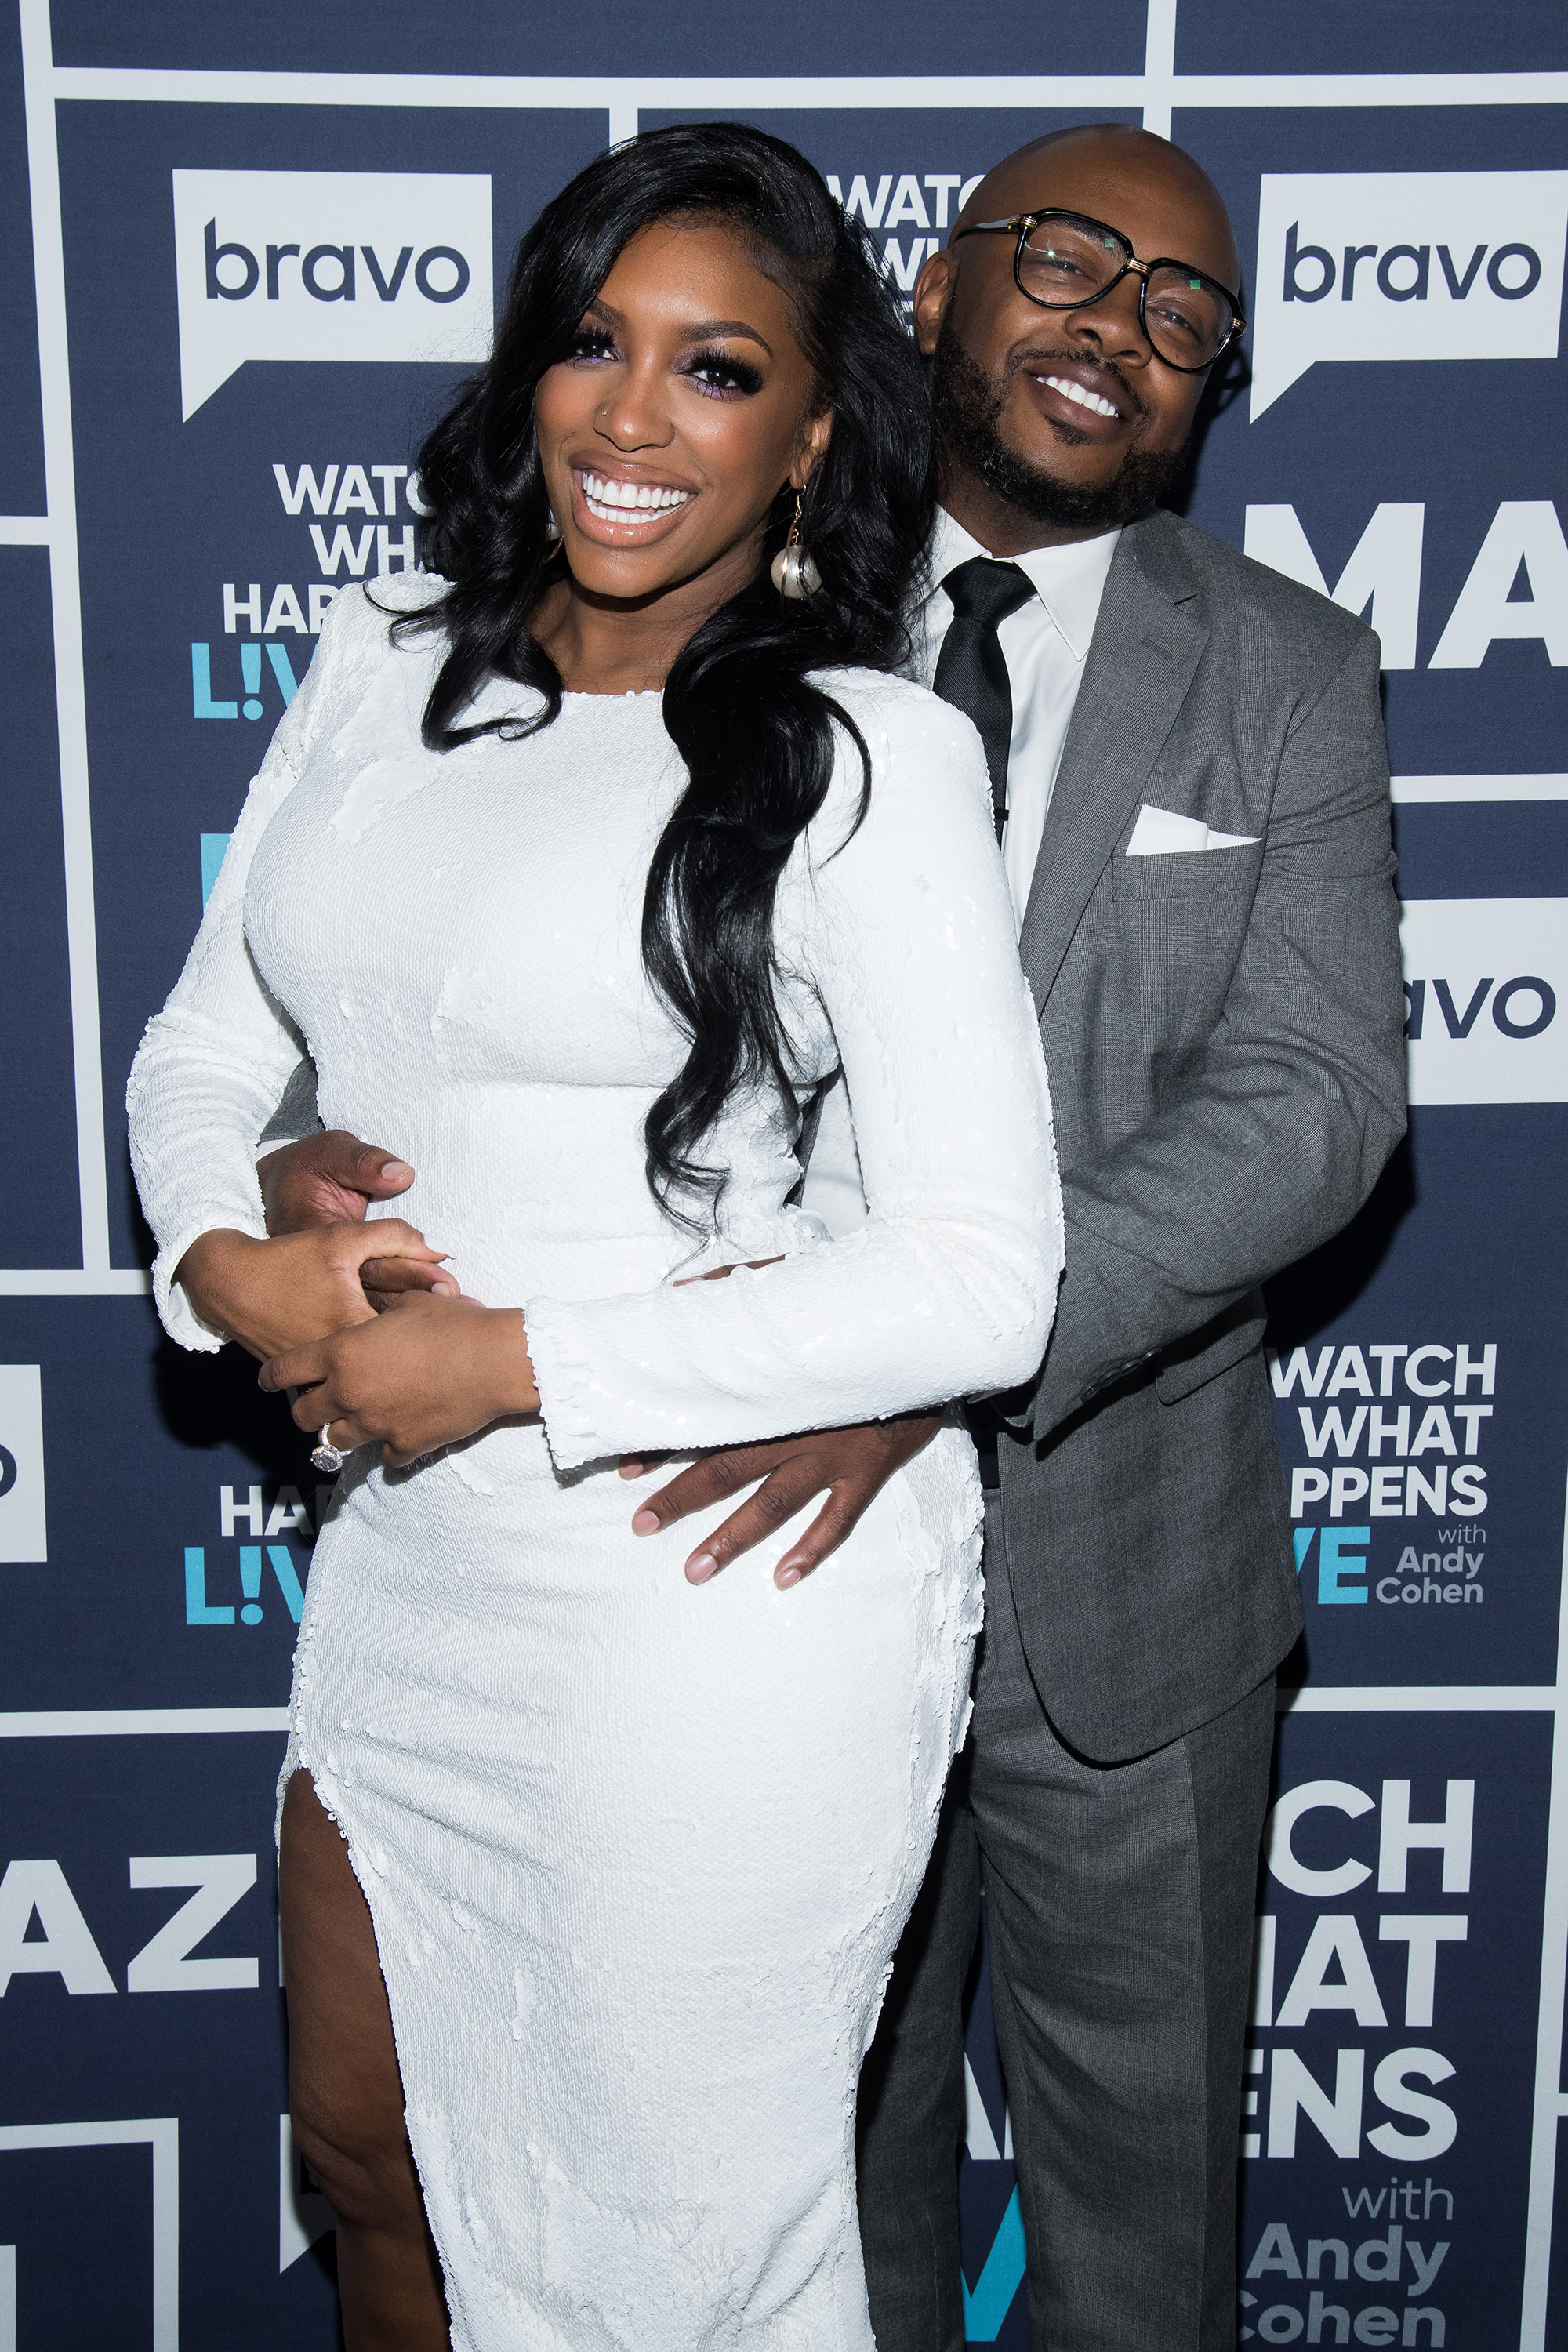 <p>It was a whirlwind 2019 for Porsha Williams and <a href="https://www.wonderwall.com/celebrity/couples/romance-report-early-october-gwyneth-married-justin-bieber-married-3016645.gallery?photoId=1037208">her fiancé</a>, Dennis McKinley: They <a href="https://www.wonderwall.com/celebrity/couples/camila-cabello-shawn-mendes-dating-celeb-love-life-news-late-june-2019-hollywood-romance-report-3020161.gallery?photoId=1055656">called it quits</a> over the summer -- just a few months after <a href="https://www.wonderwall.com/celebrity/photos/stars-who-had-babies-2019-celebrity-gave-birth-pregnancy-adopted-surrogate-3018112.gallery?photoId=1043224">their daughter was born</a> -- amid reports that <a href="https://www.wonderwall.com/celebrity/couples/bradley-cooper-irina-shayk-headed-split-breakup-celeb-love-life-new-early-june-2019-hollywood-romance-report-3019897.gallery?photoId=1056287">he cheated</a>. At first, they denied the infidelity rumors -- and even <a href="https://www.wonderwall.com/celebrity/couples/gigi-hadid-bachelorette-love-triangle-hannah-brown-tyler-cameron-celeb-love-life-news-early-august-2019-hollywood-romance-report-3020646.gallery?photoId=1055656">reconciled</a>. But then, as Porsha revealed on a mid-November episode of "The Real Housewives of Atlanta," Dennis admitted during a therapy session that <a href="https://www.wonderwall.com/celebrity/couples/demi-lovato-new-boyfriend-austin-wilson-dating-celeb-love-life-news-mid-november-2019-hollywood-romance-report-3021573.gallery?photoId=1055656">he cheated on her while she was pregnant</a>. They spent the rest of the summer and fall working on their relationship. By the holidays, they were <a href="https://www.wonderwall.com/celebrity/couples/emma-stone-engaged-celeb-love-life-news-early-december-2019-hollywood-romance-report-3021744.gallery?photoId=1055656">officially engaged again</a>. But a year later in December 2020, she told "Watch What Happens Live" host Andy Cohen they were single again.</p>